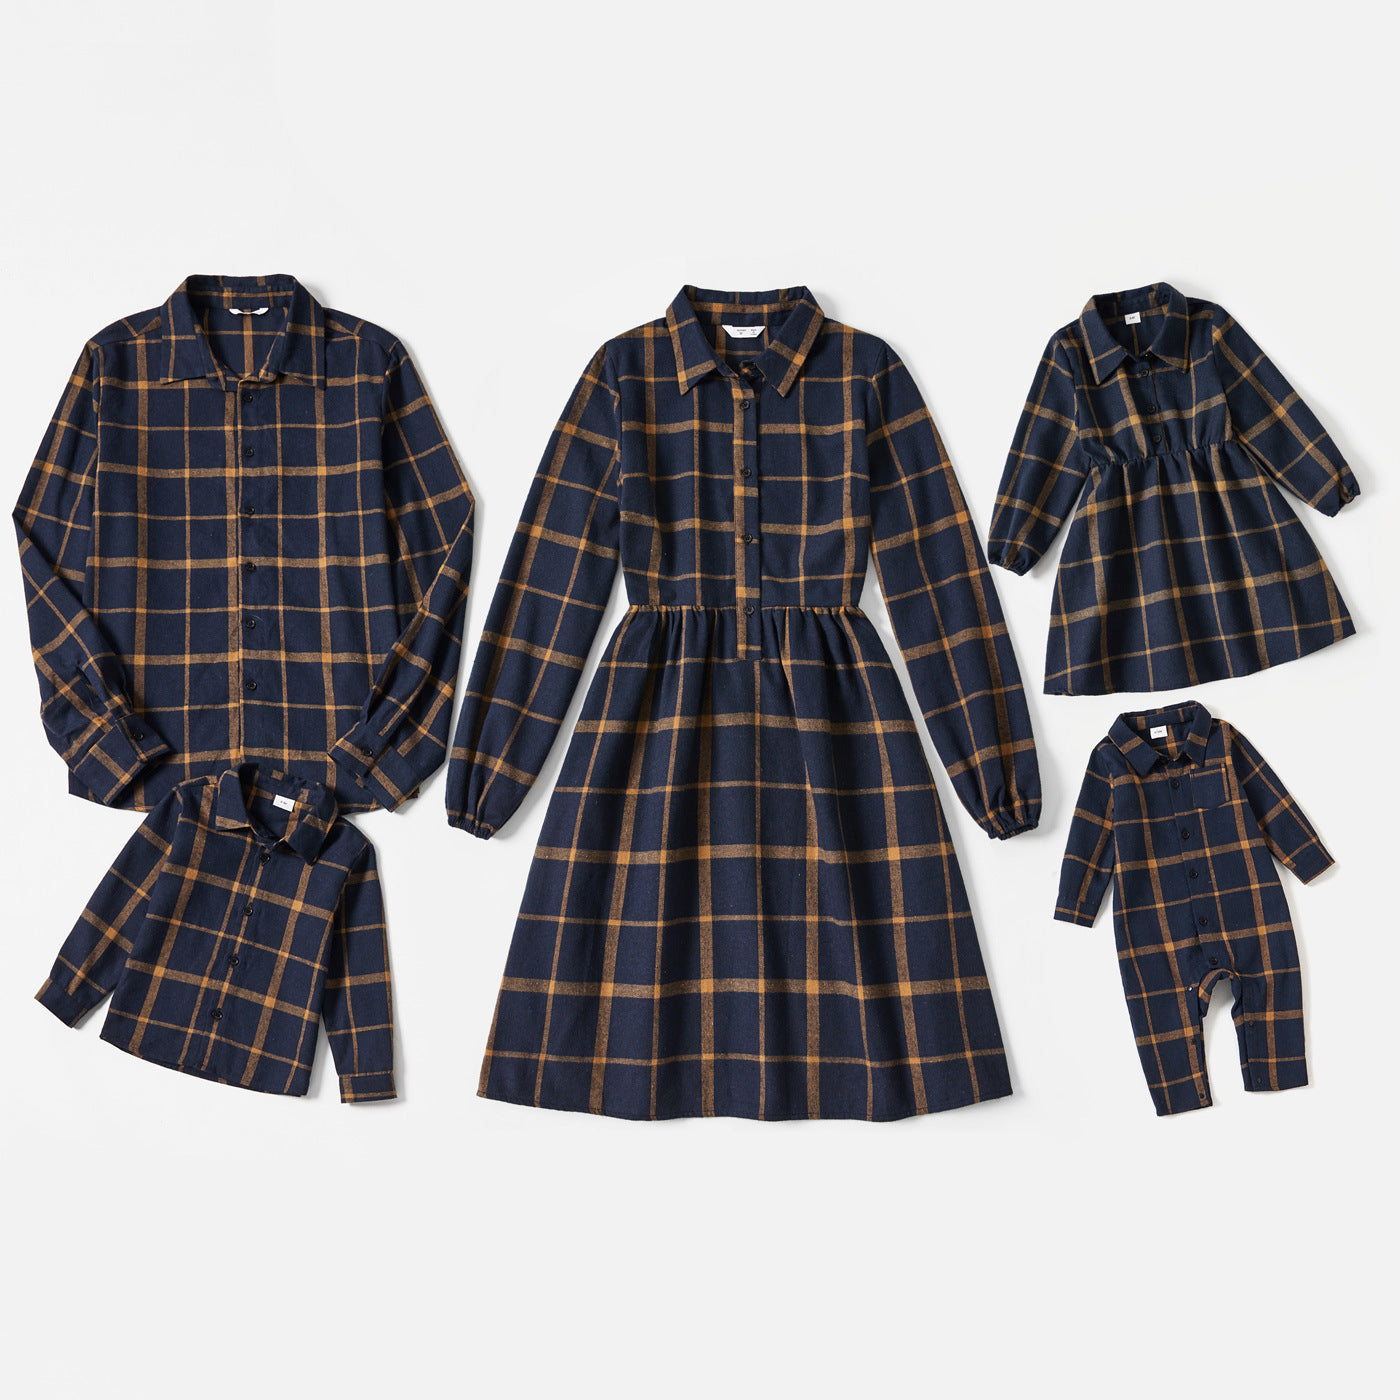 Family Matching Plaid Print Blue Long-sleeve Family Dresses and Shirts Sets